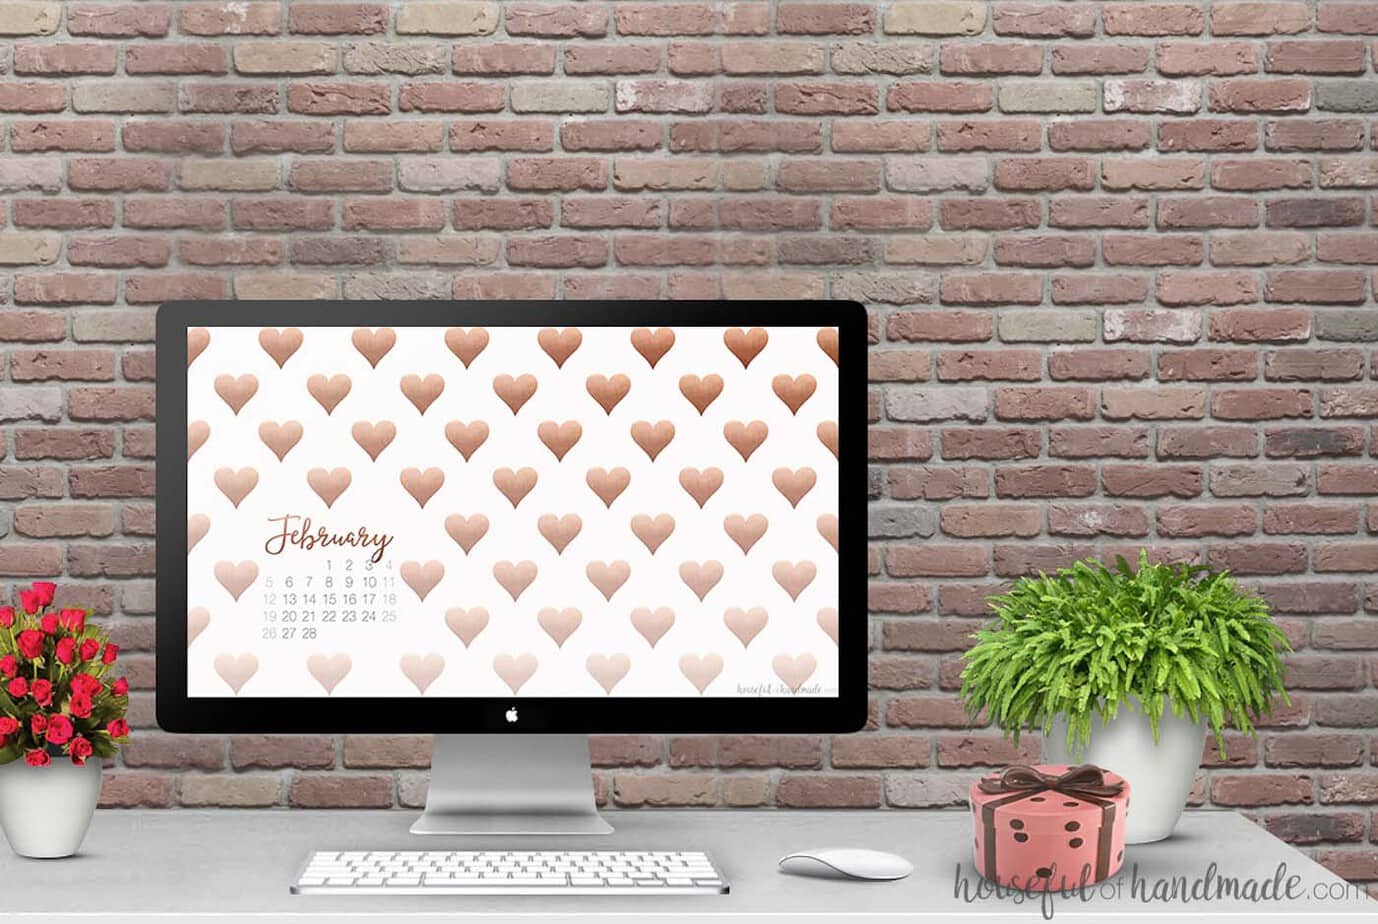 Free Digital Backgrounds for February with or without a digital calendar to keep you organized. || Gold Heart Print || Free Download || Digital Wallpaper || iPhone Wallpaper || Ombre Hearts Print || Housefulofhandmade.com